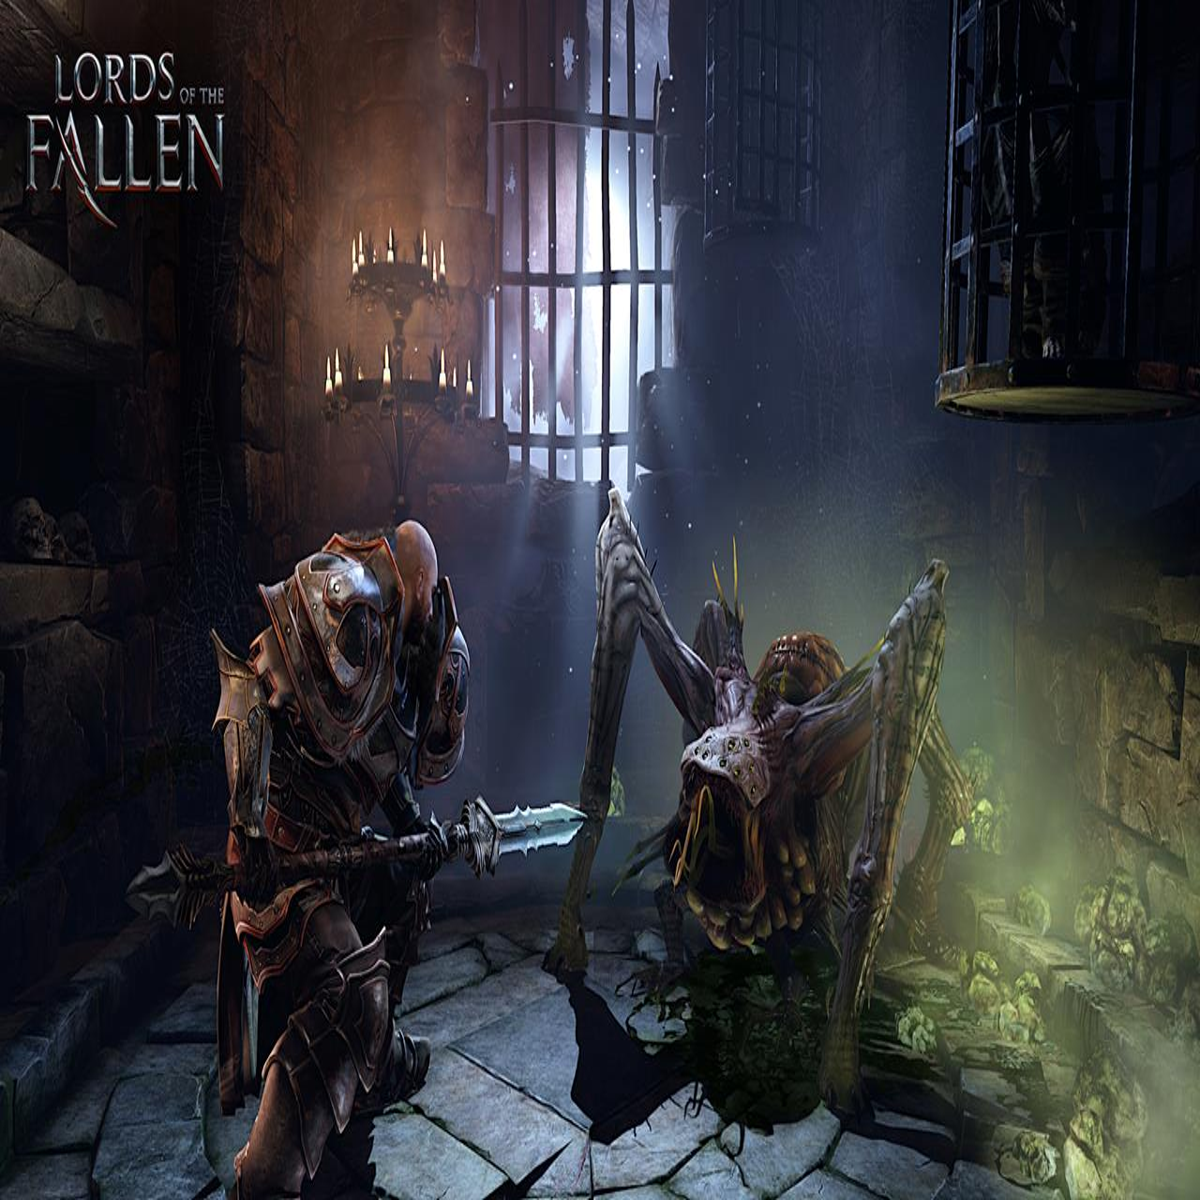 The New Lords Of The Fallen Is The Most Direct Interpretation Of